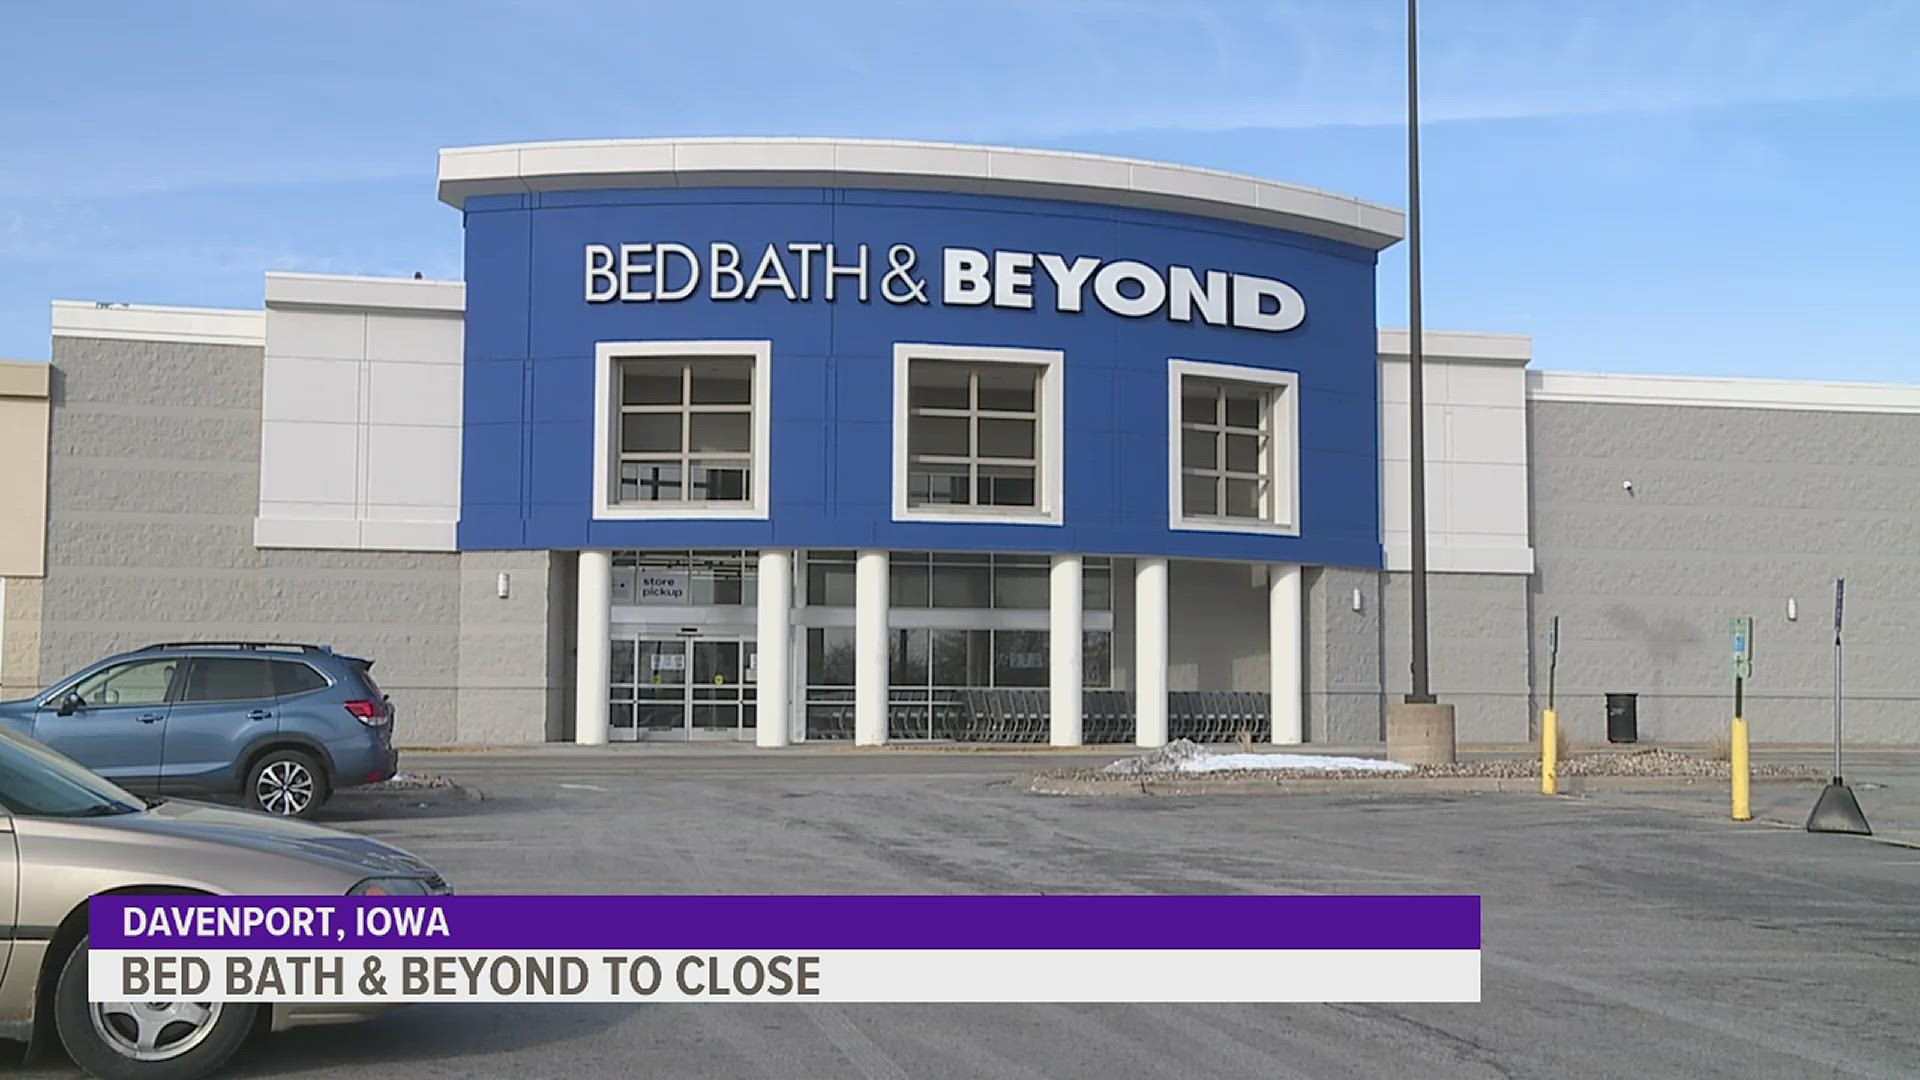 The latest list of store closings includes 87 namesake Bed, Bath & Beyond stores, 50 Harmon drugstores and several buybuy Baby locations.